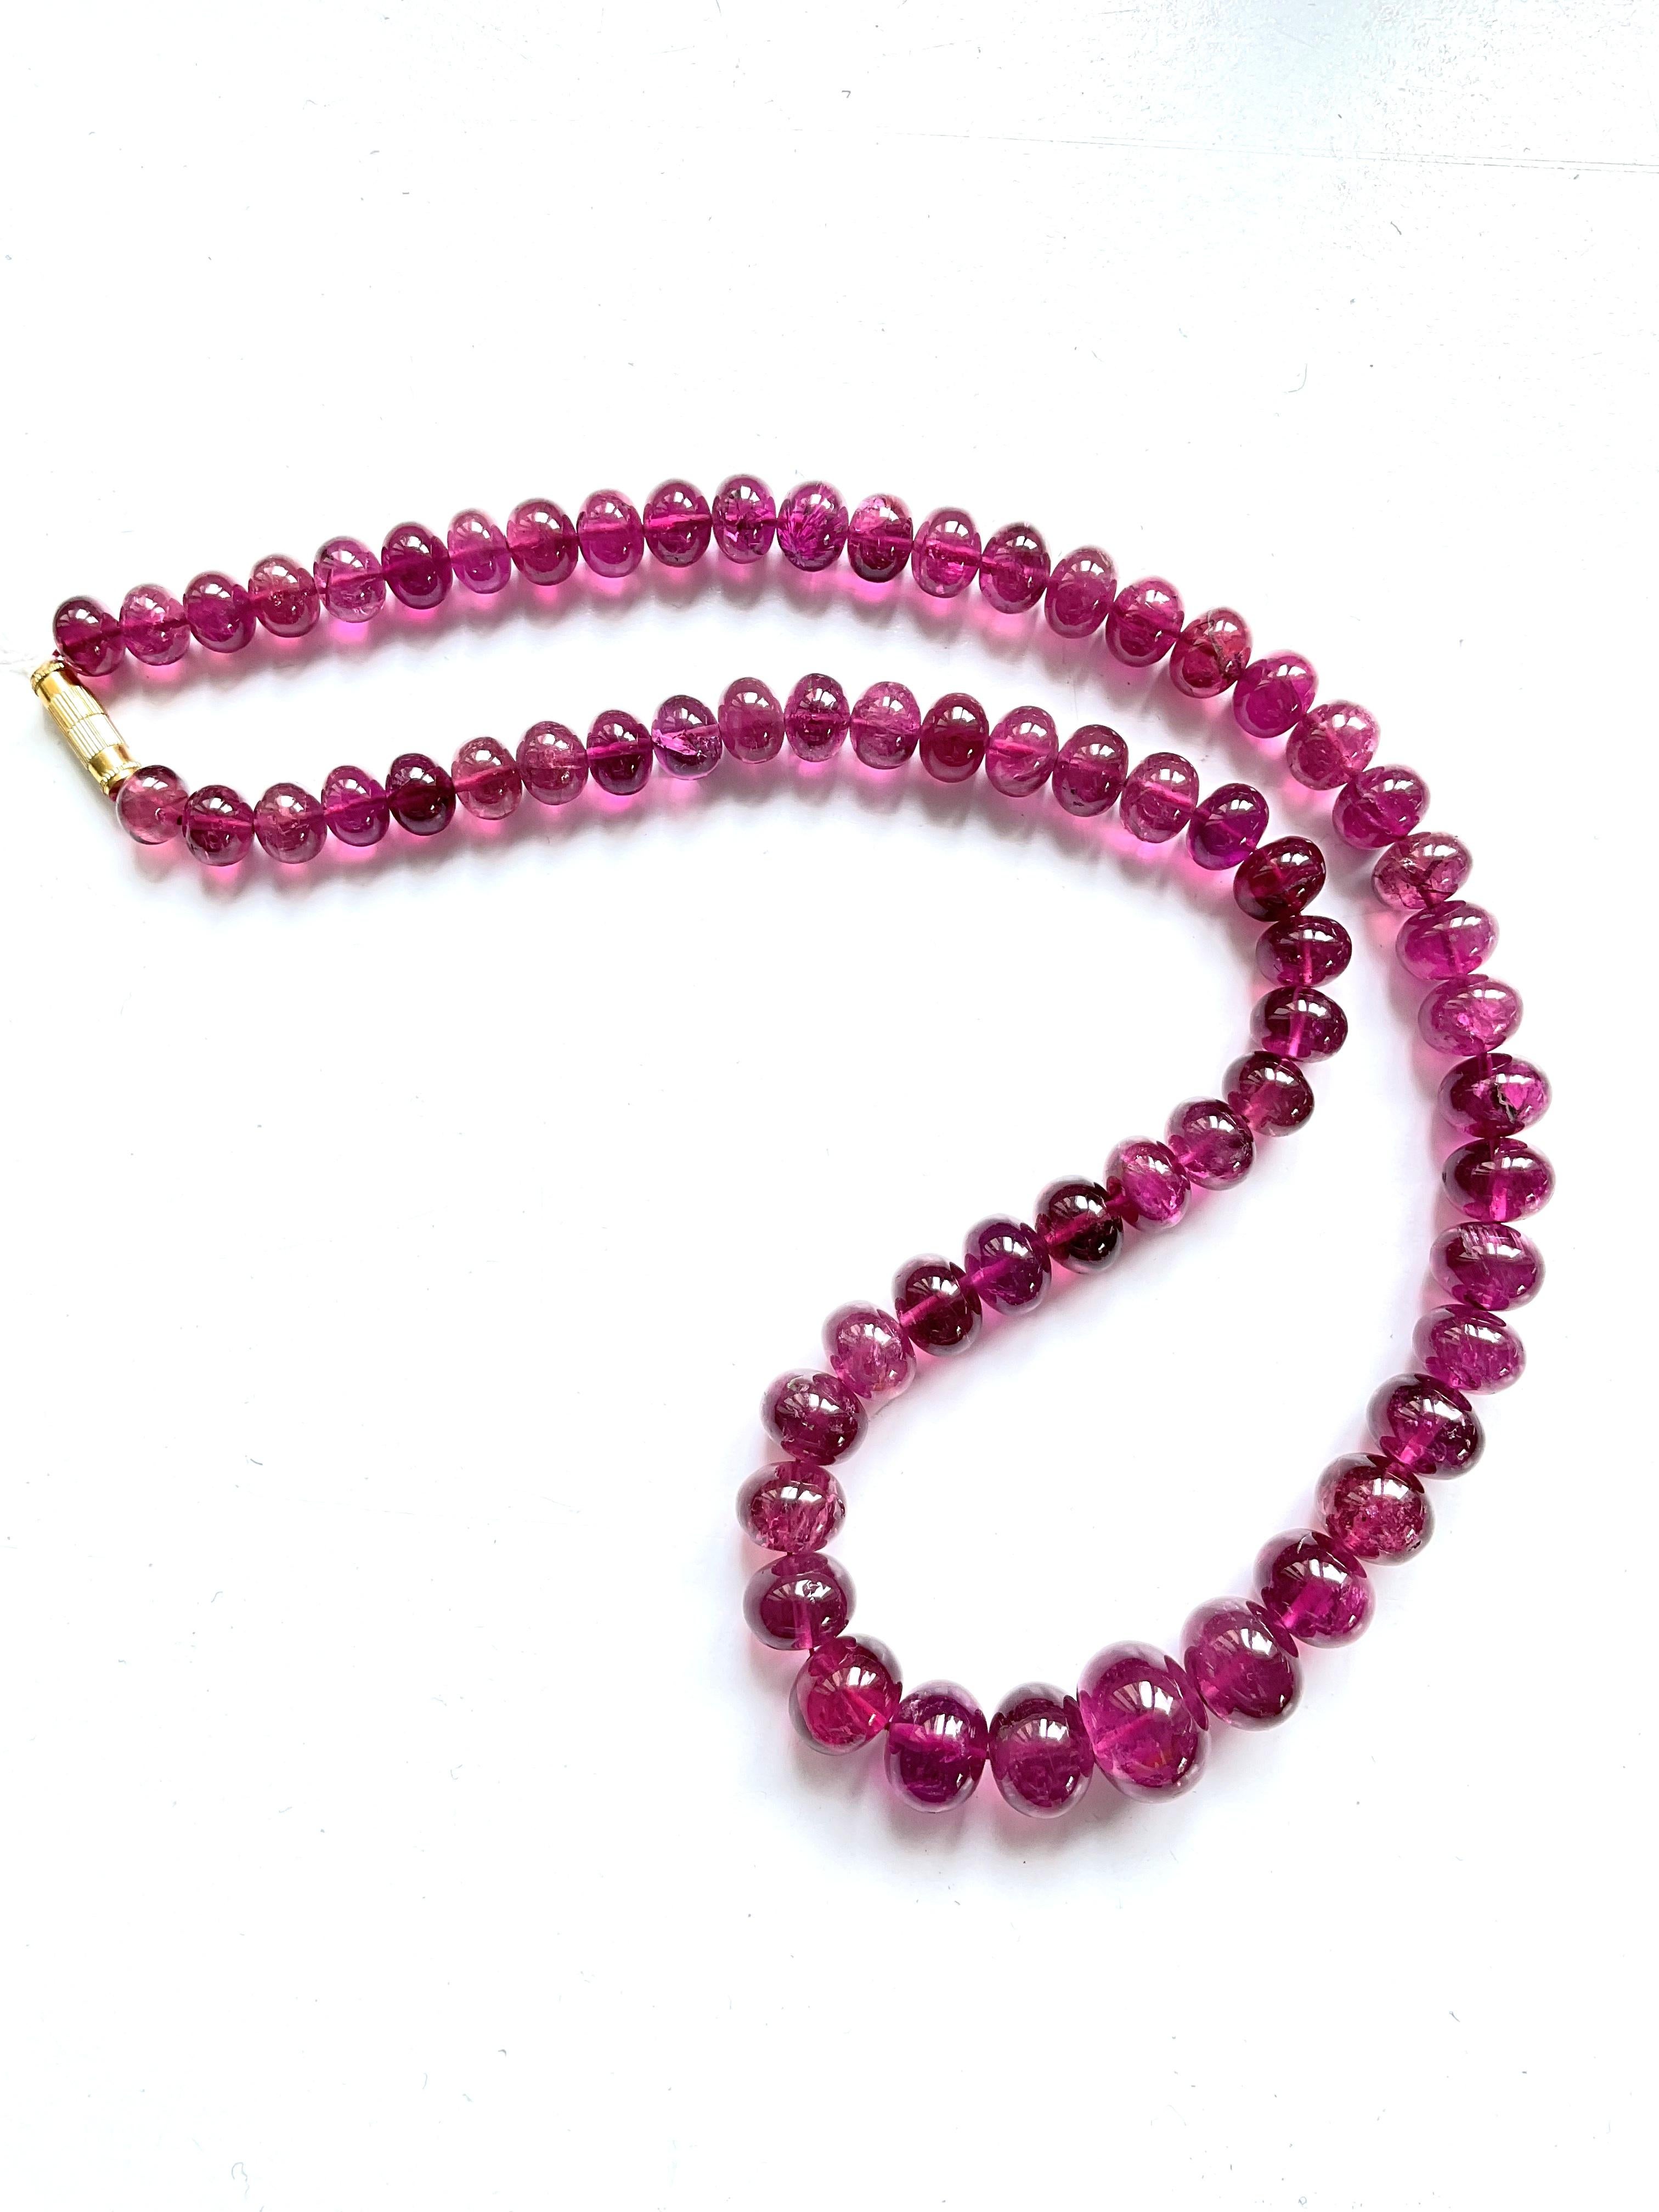 Women's or Men's 335.01 Carats Top Quality Rubellite Tourmaline Beads Natural Gemstones necklace For Sale